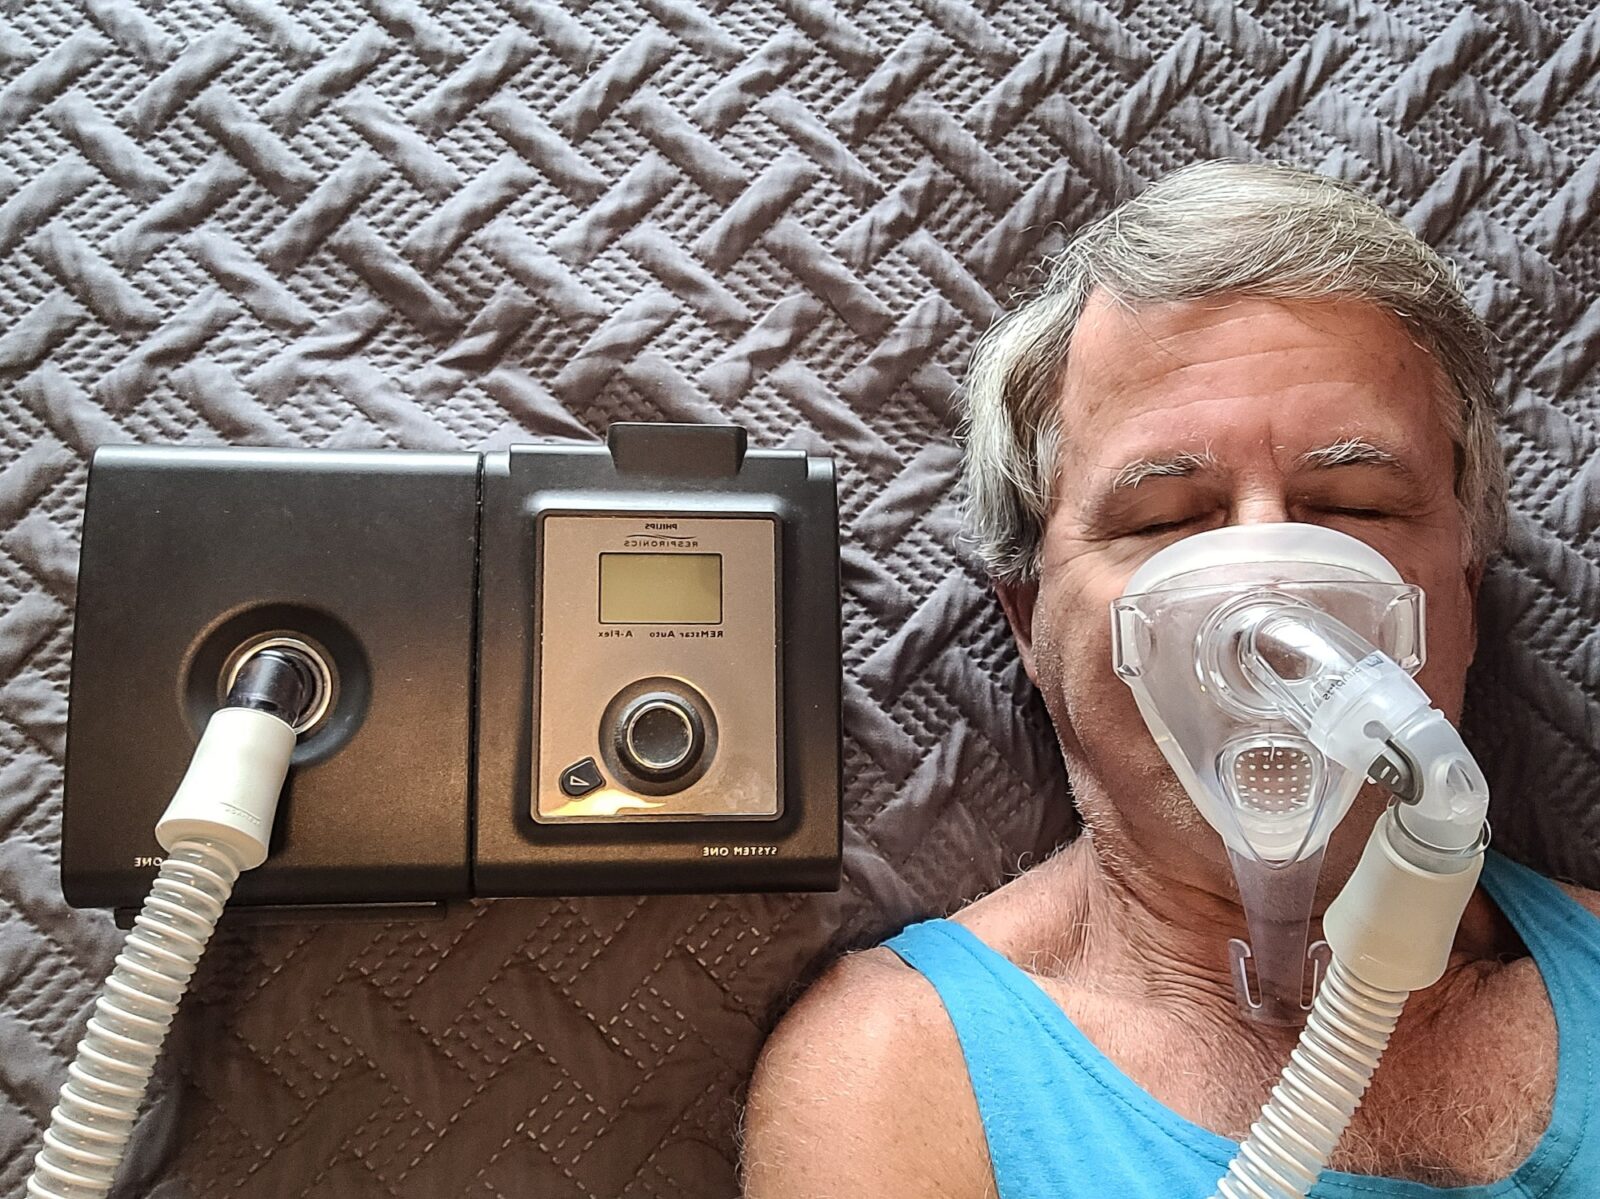 CPAP machine in use to help prevent snoring and sleep apnea now can cause cancer.